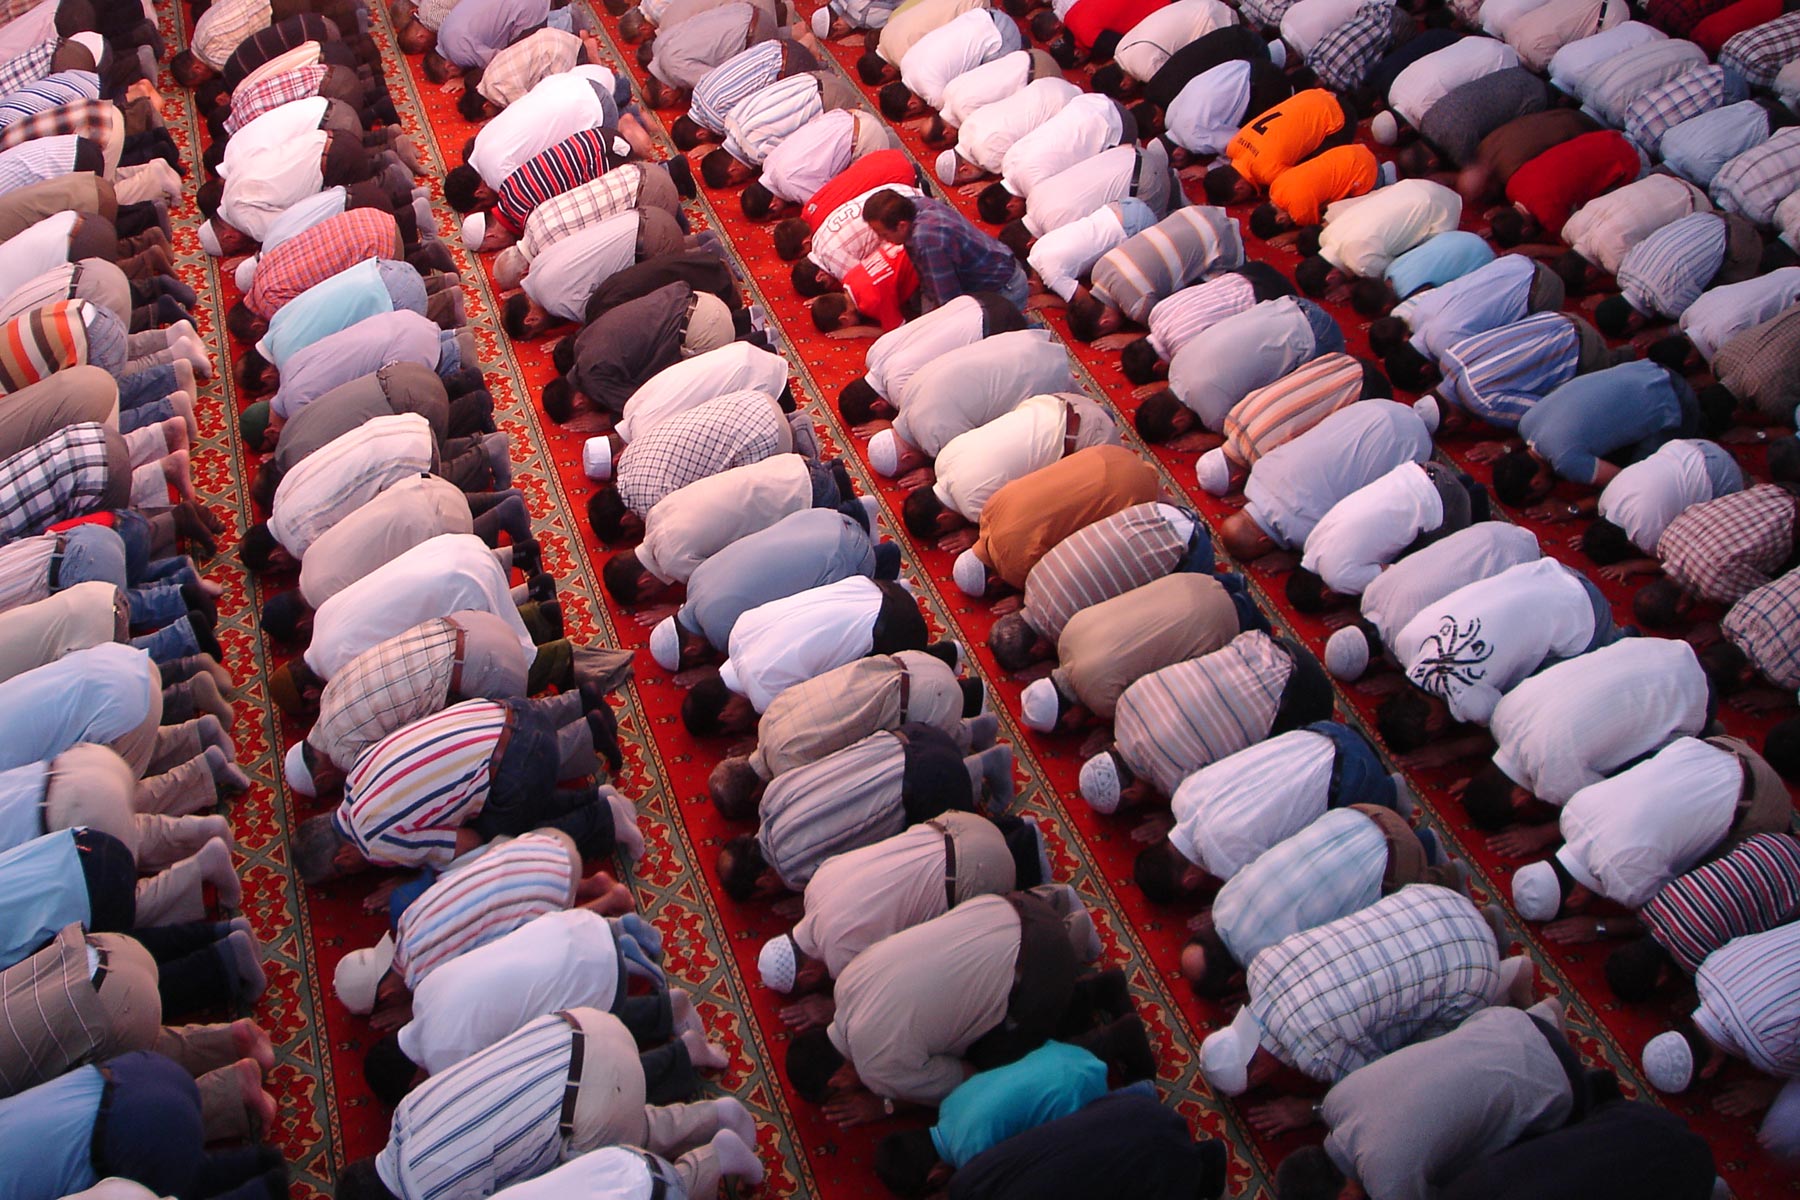 Why Islam Is So Different From Other Religions